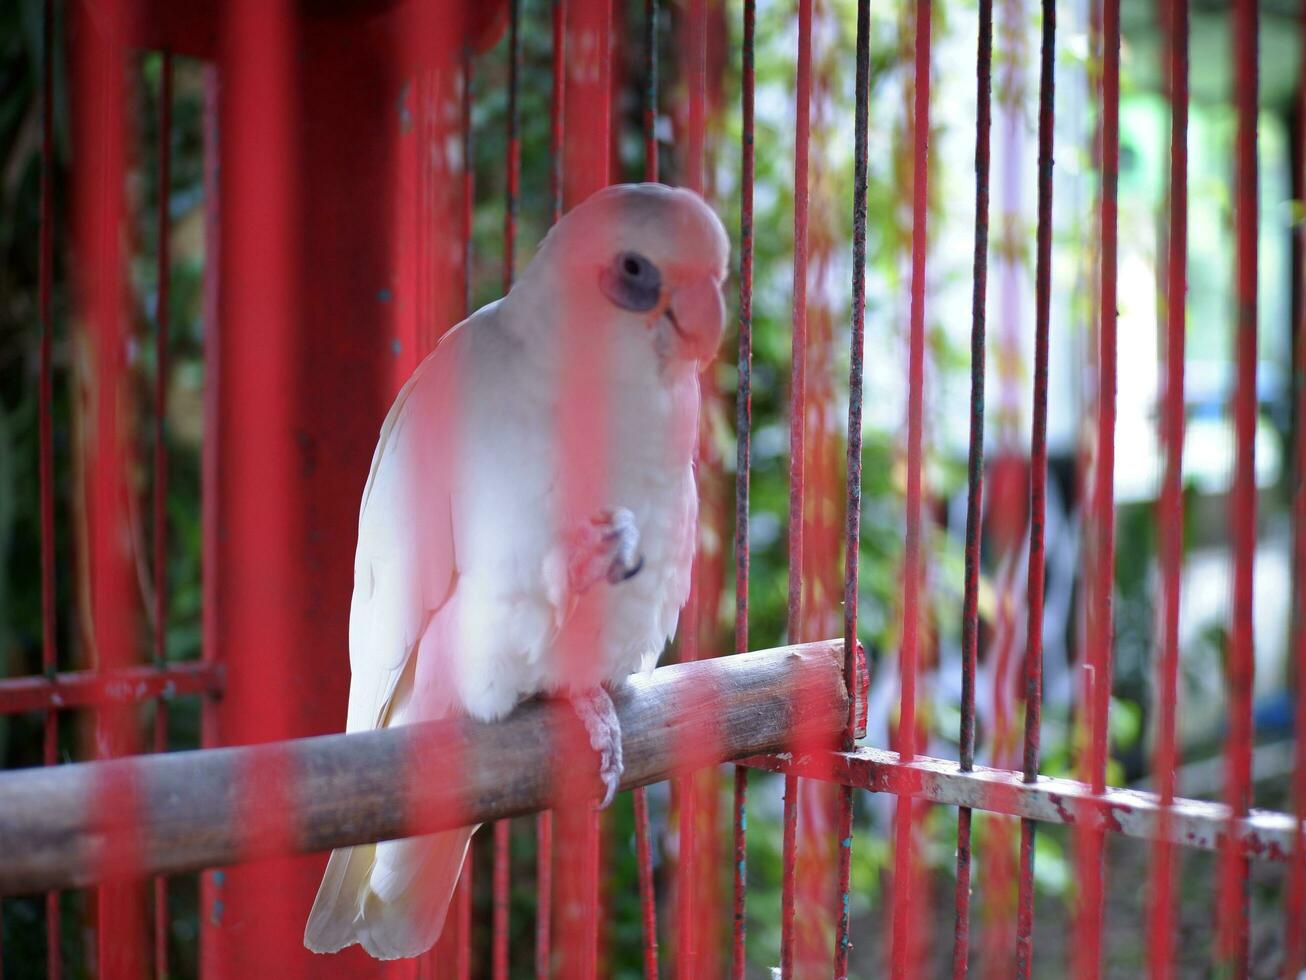 Parrot perched on a wooden branch then scratches its beak in a red cage photo